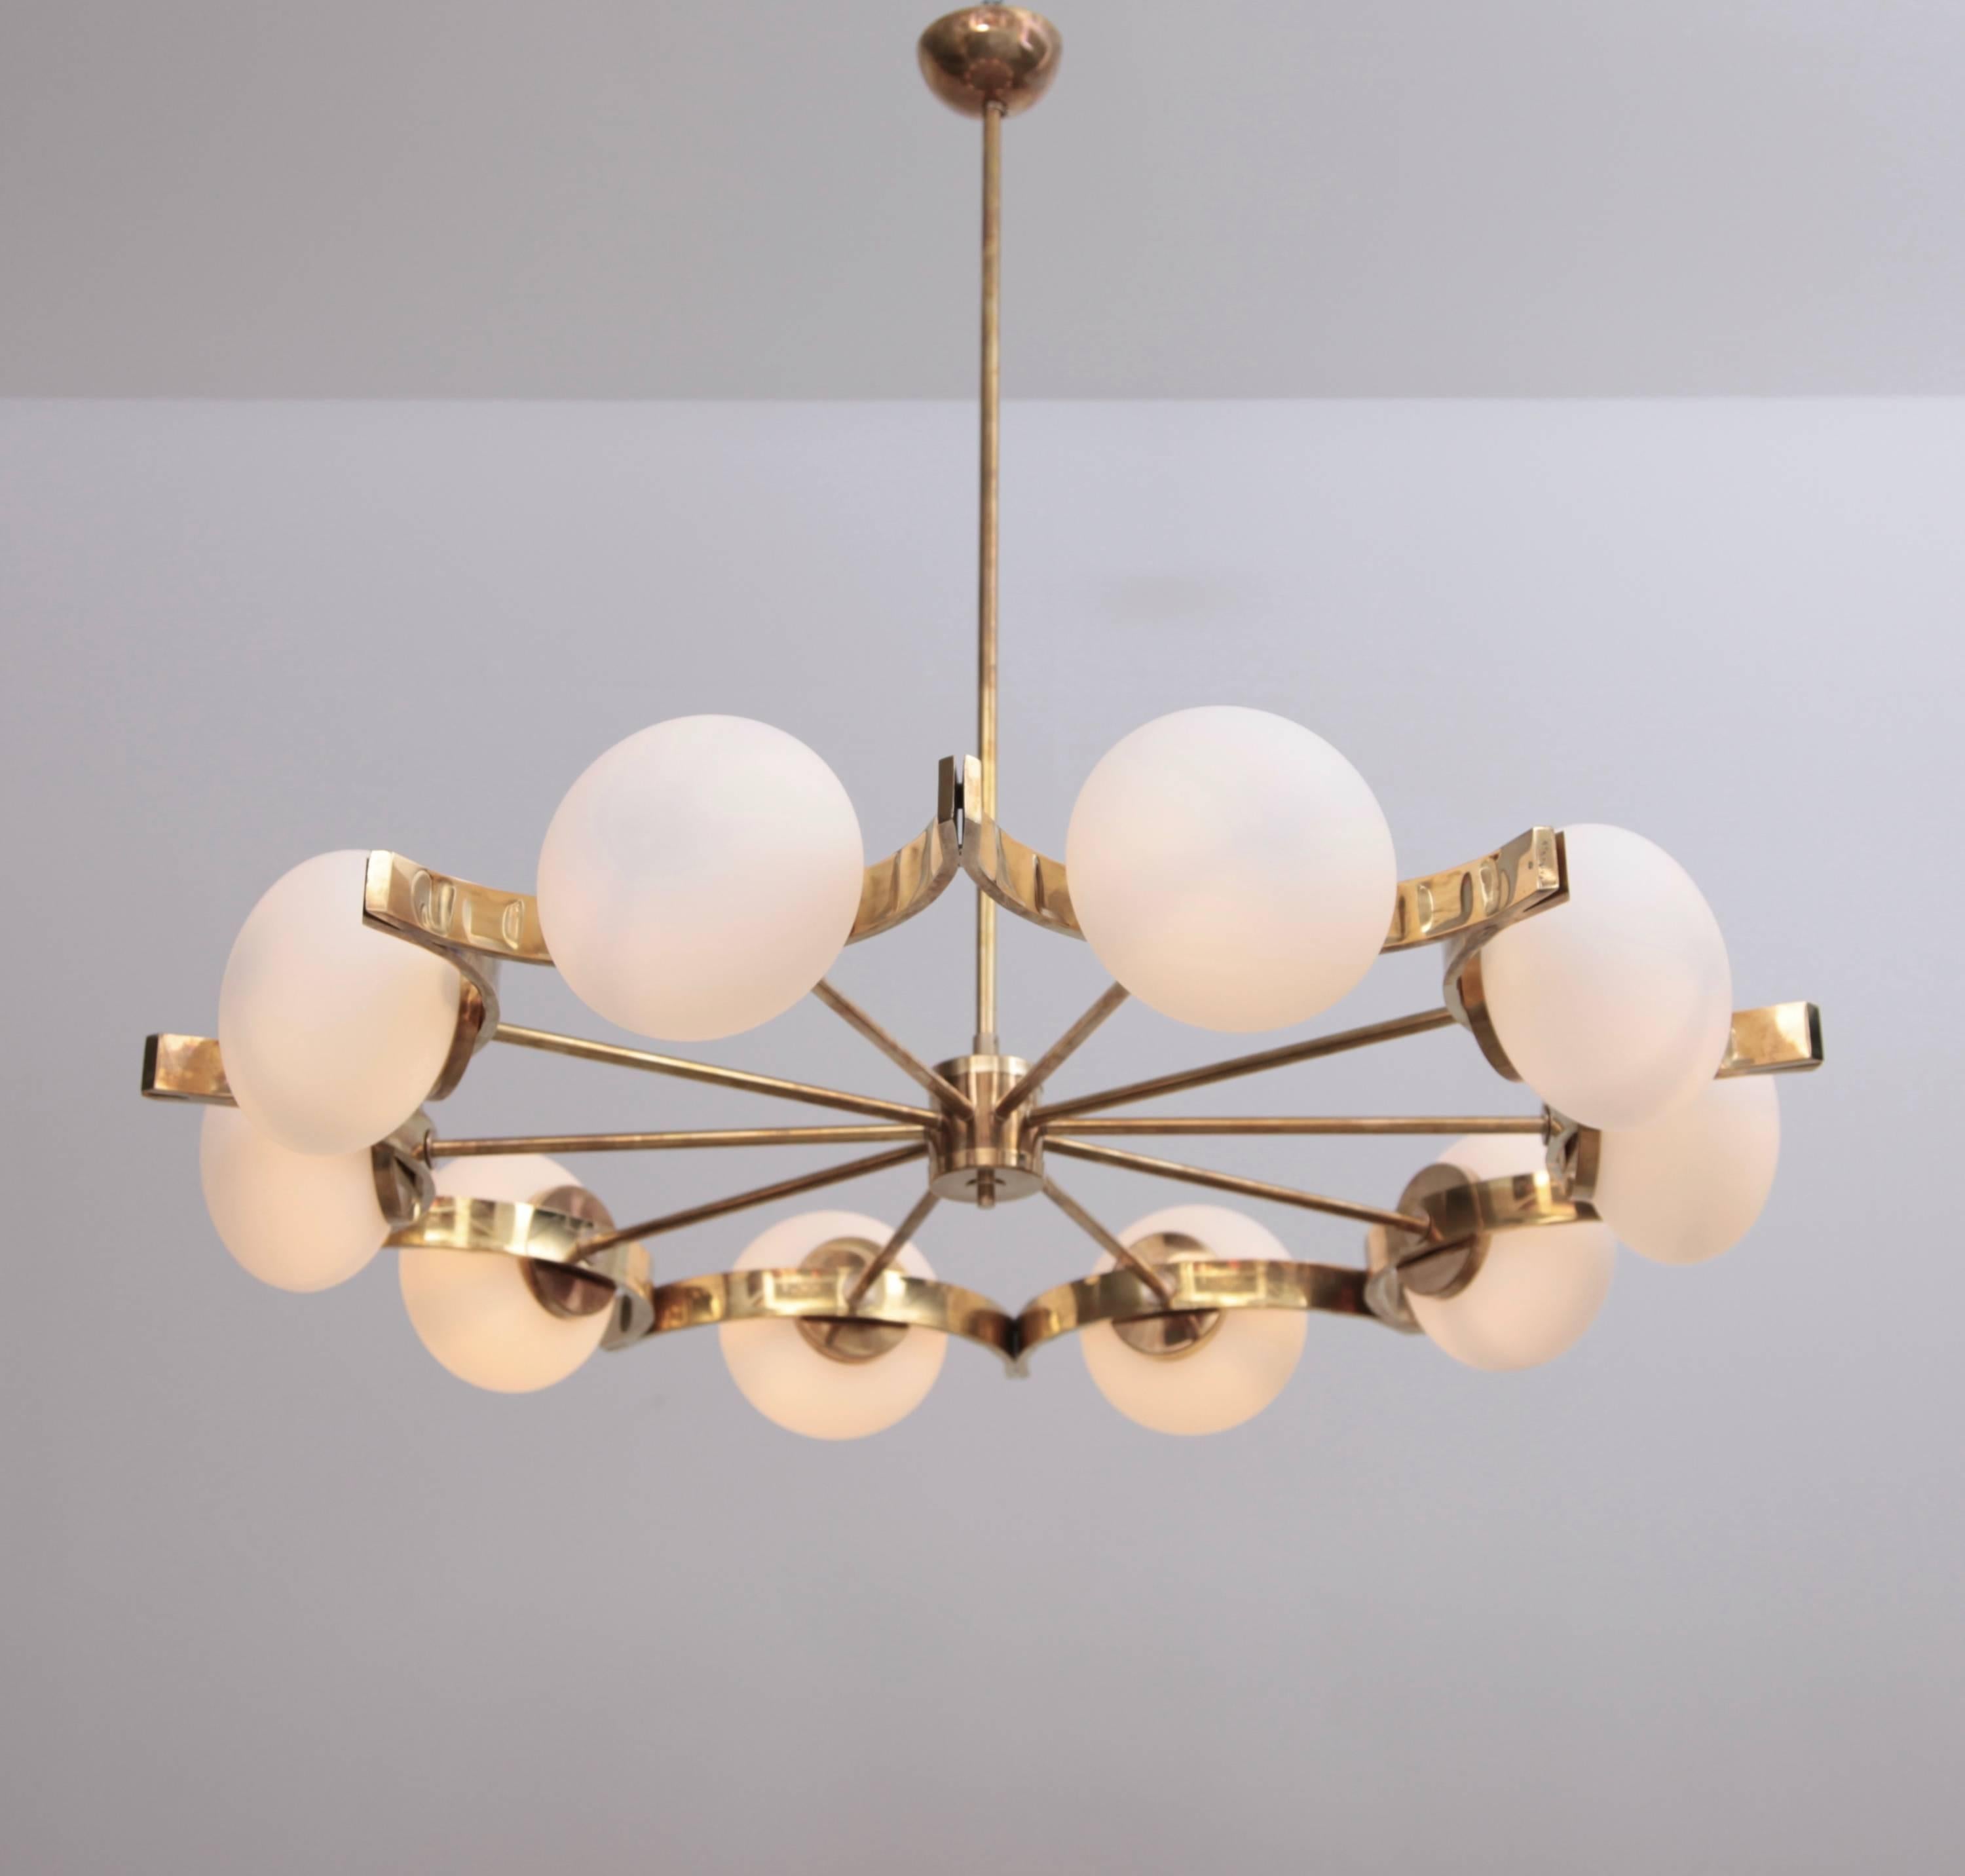 Stunning Murano glass and brass chandelier. The chandelier has a impressing size and is a real eye-catcher in every room and its in excellent condition.

Ten x E27.